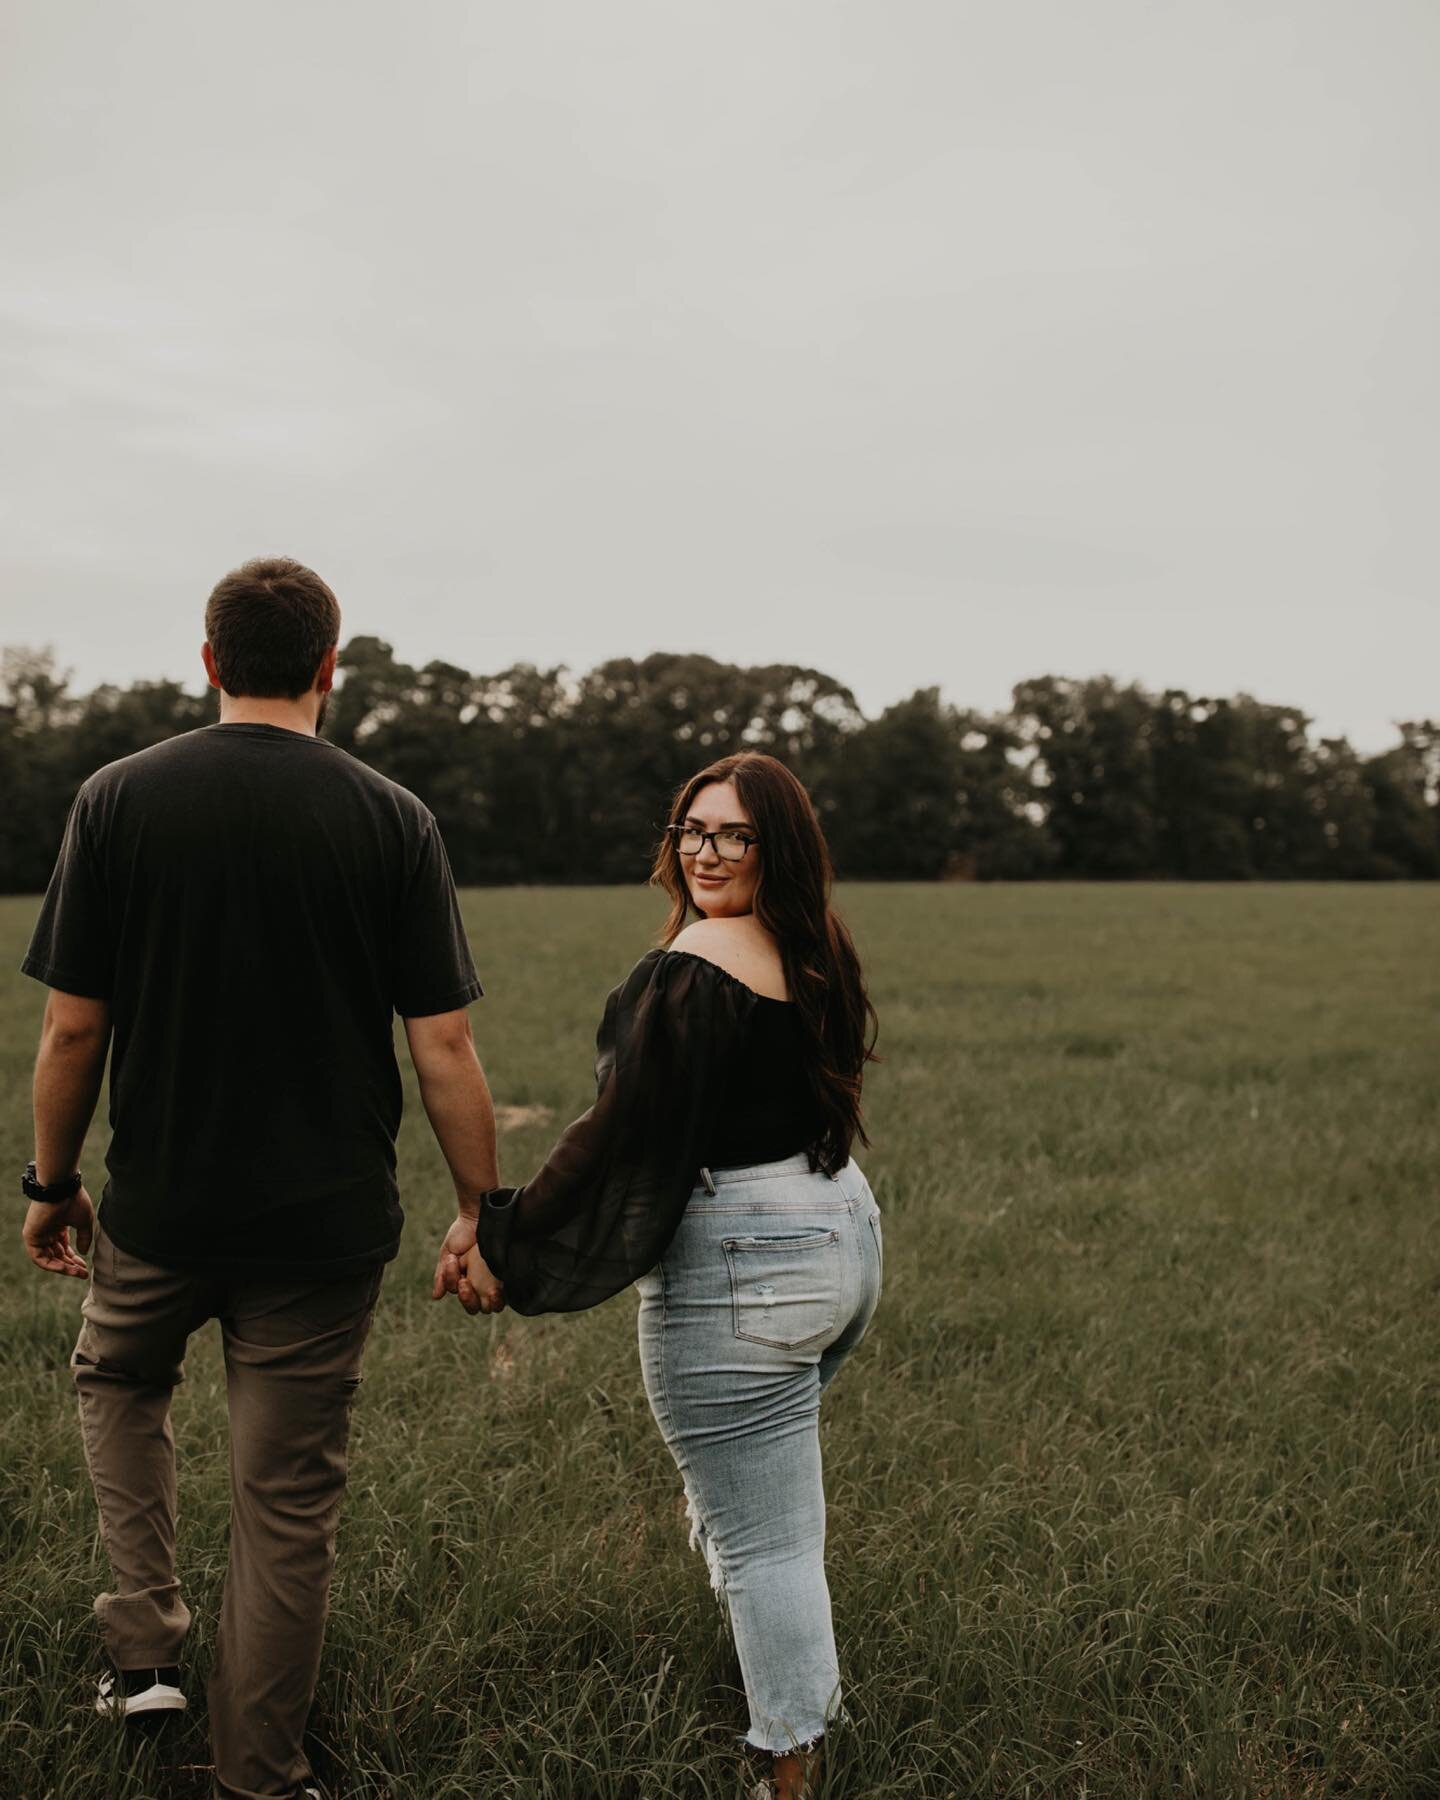 Spent the weekend in MD to capture these two. 🥰 so stoked to head back for their wedding this fall!